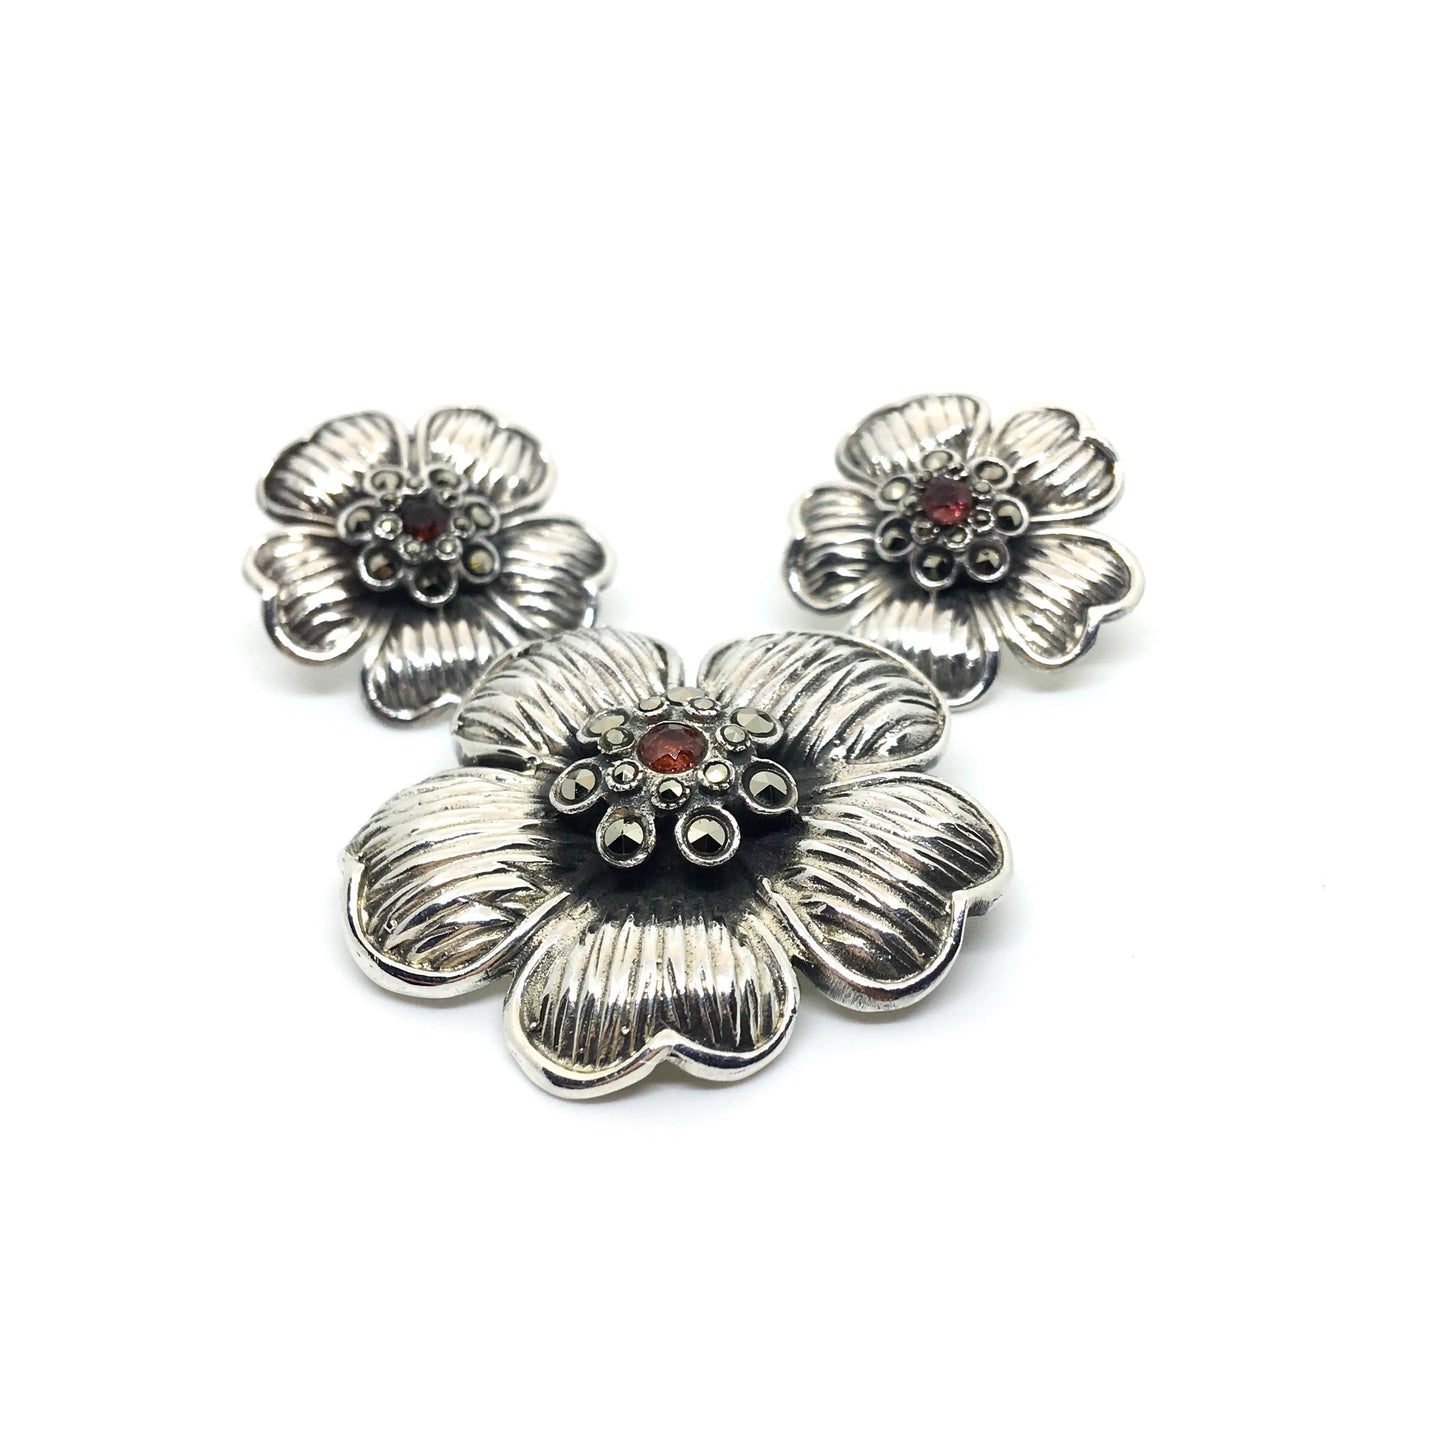 Brooches & Lapel Pins - Sterling Silver Garnet Dogwood Matching Jewelry set - Pre-owned Flower Brooch & Earrings - Marcasite Stone Pin